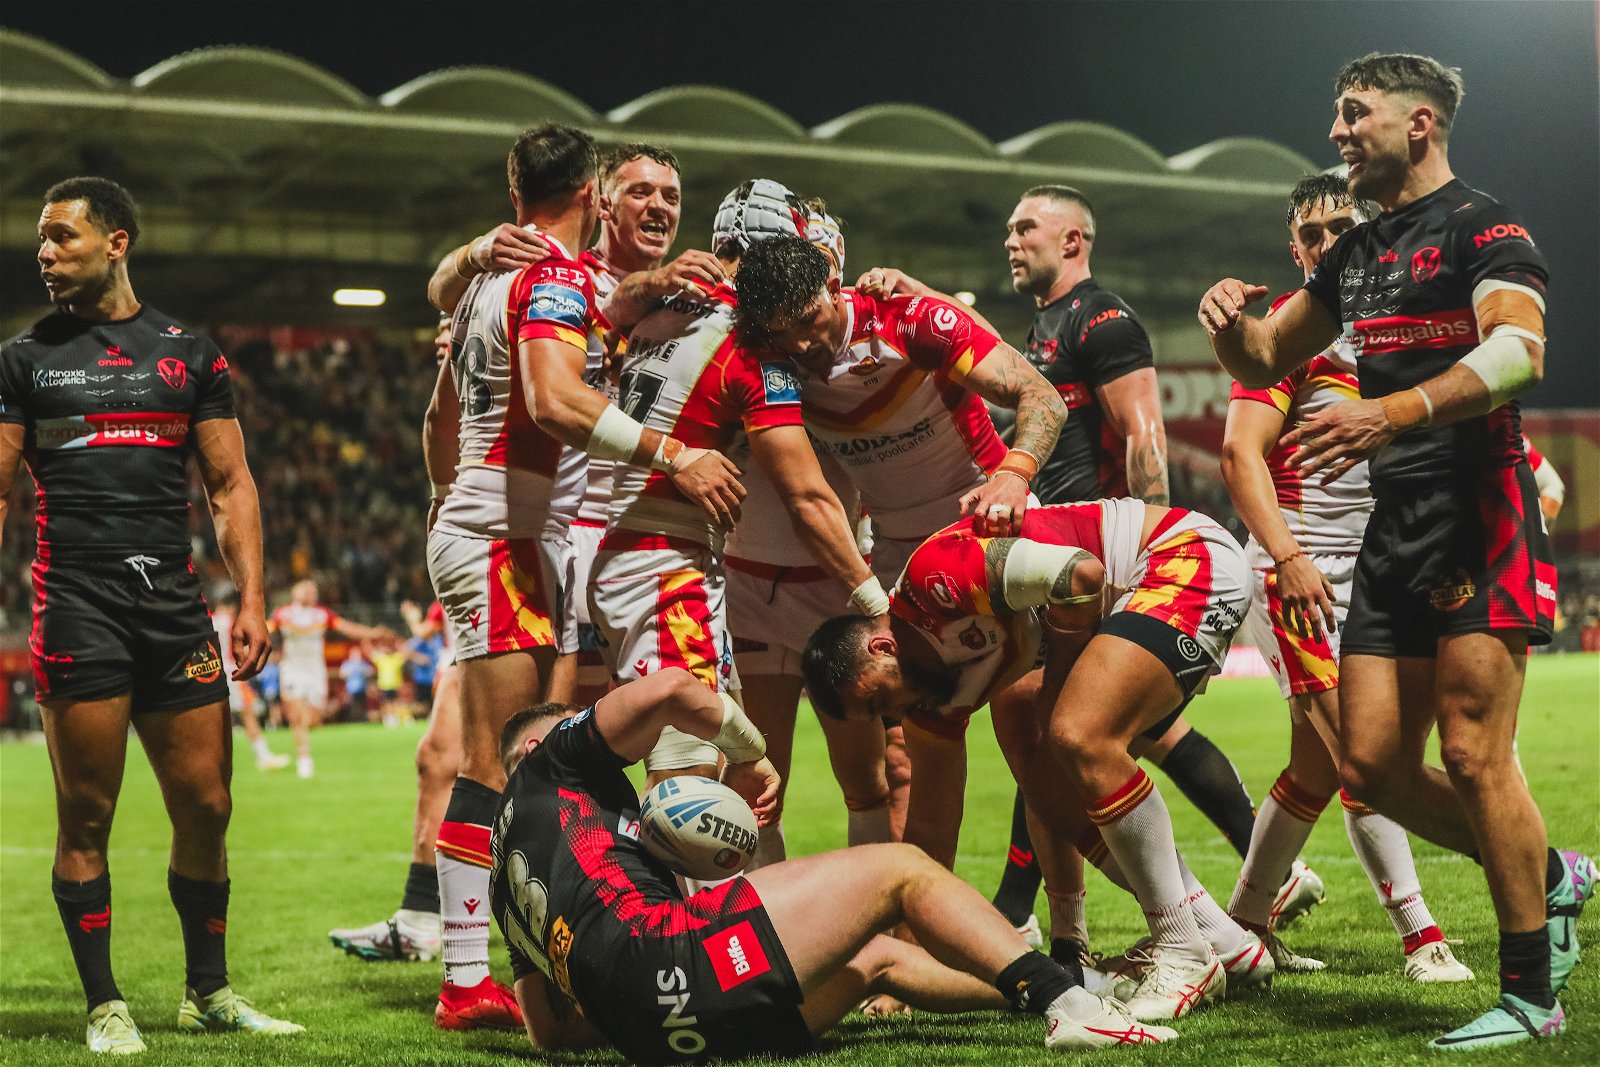 St Helens vs Catalans Dragons in Super League